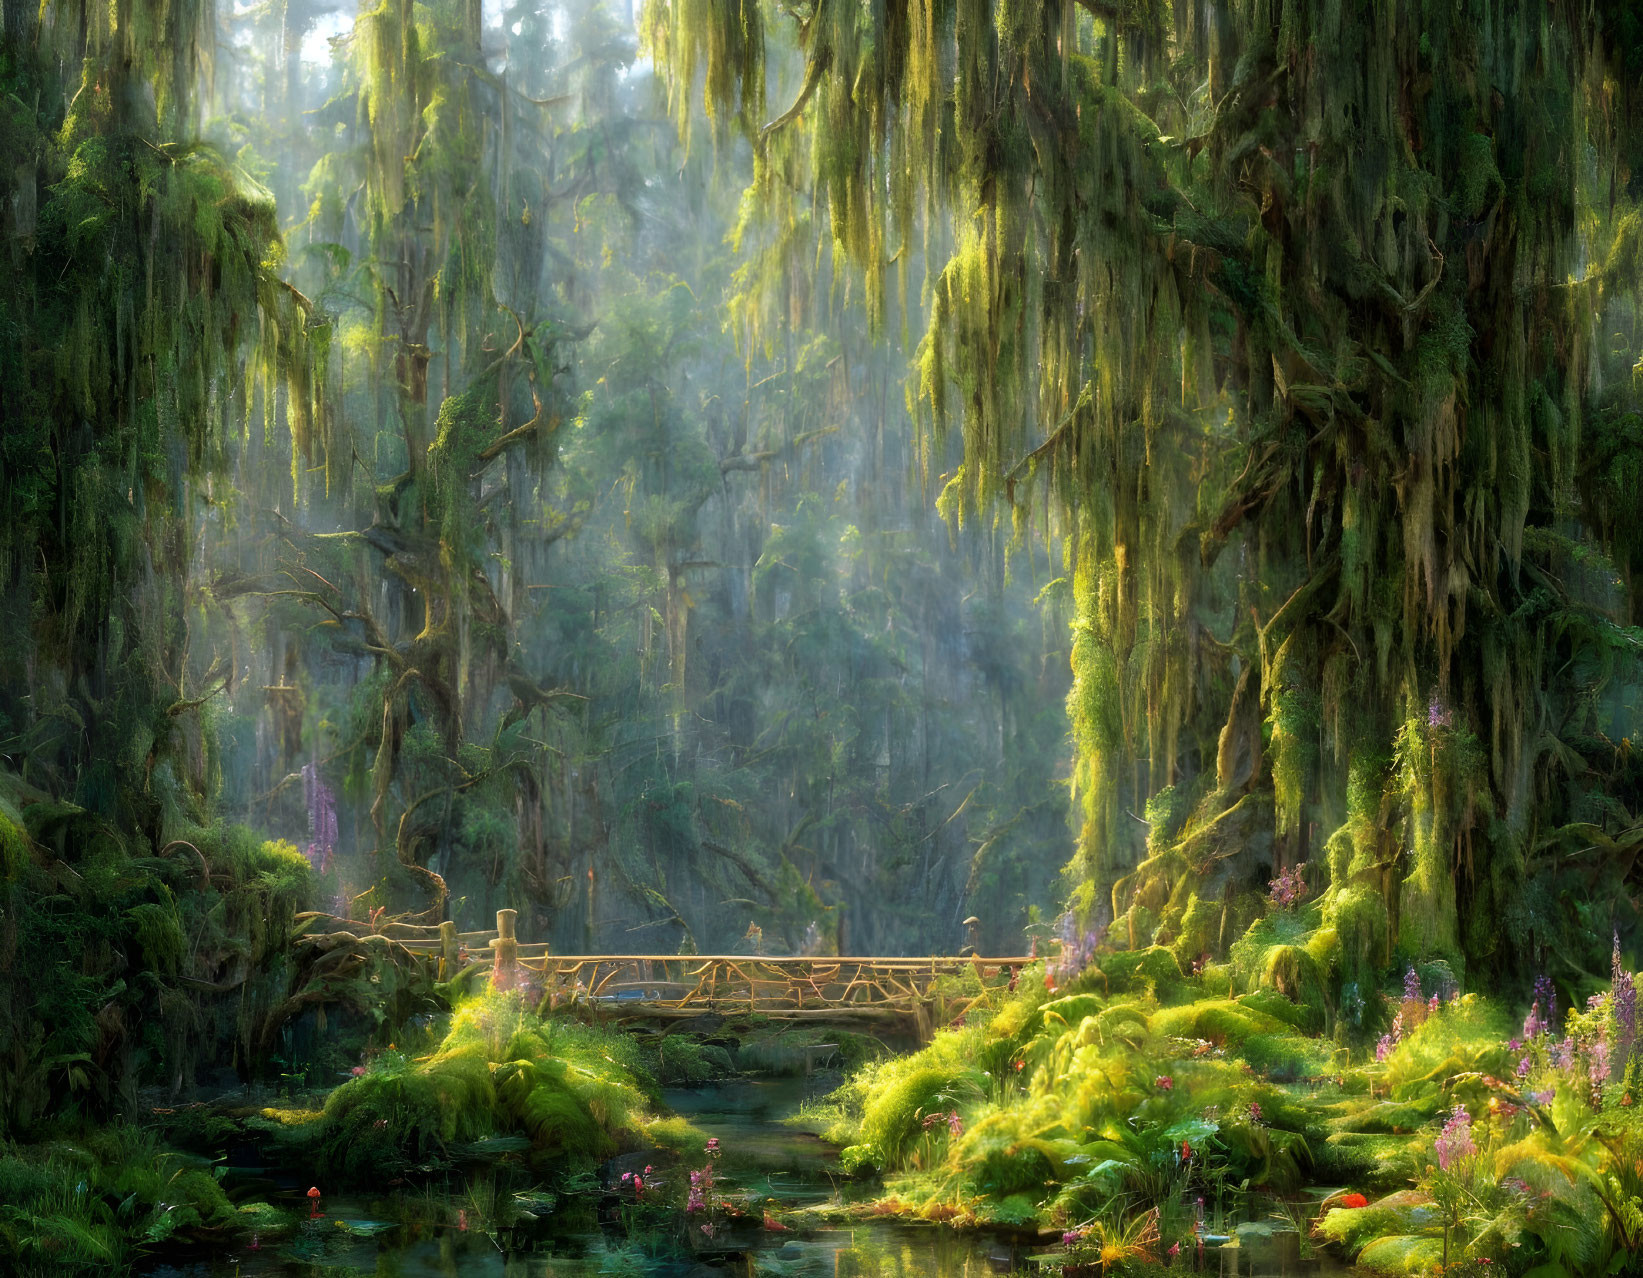 Ethereal forest scene with sunlight, wooden bridge, moss-laden trees